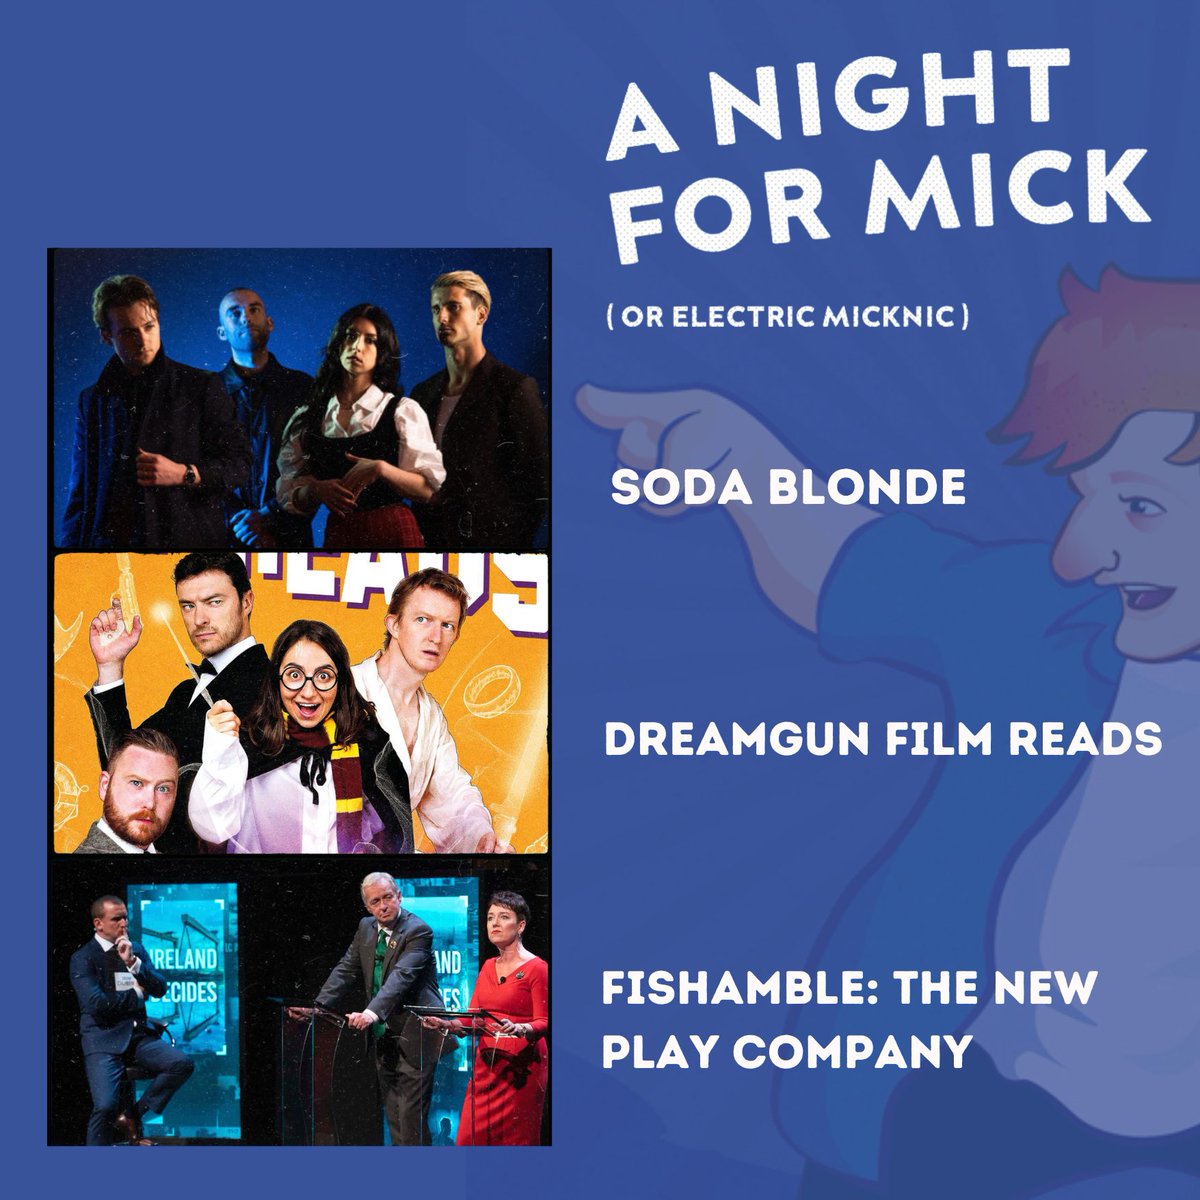 The first of many amazing acts performing at #ANightForMick in @smockalley on April 14th! Tickets are flying out the door- book now to avoid bitter, soul-crushing disappointment. smockalley.com/a-night-for-mi… @sodablonde @dreamgunandsons @Fishamble